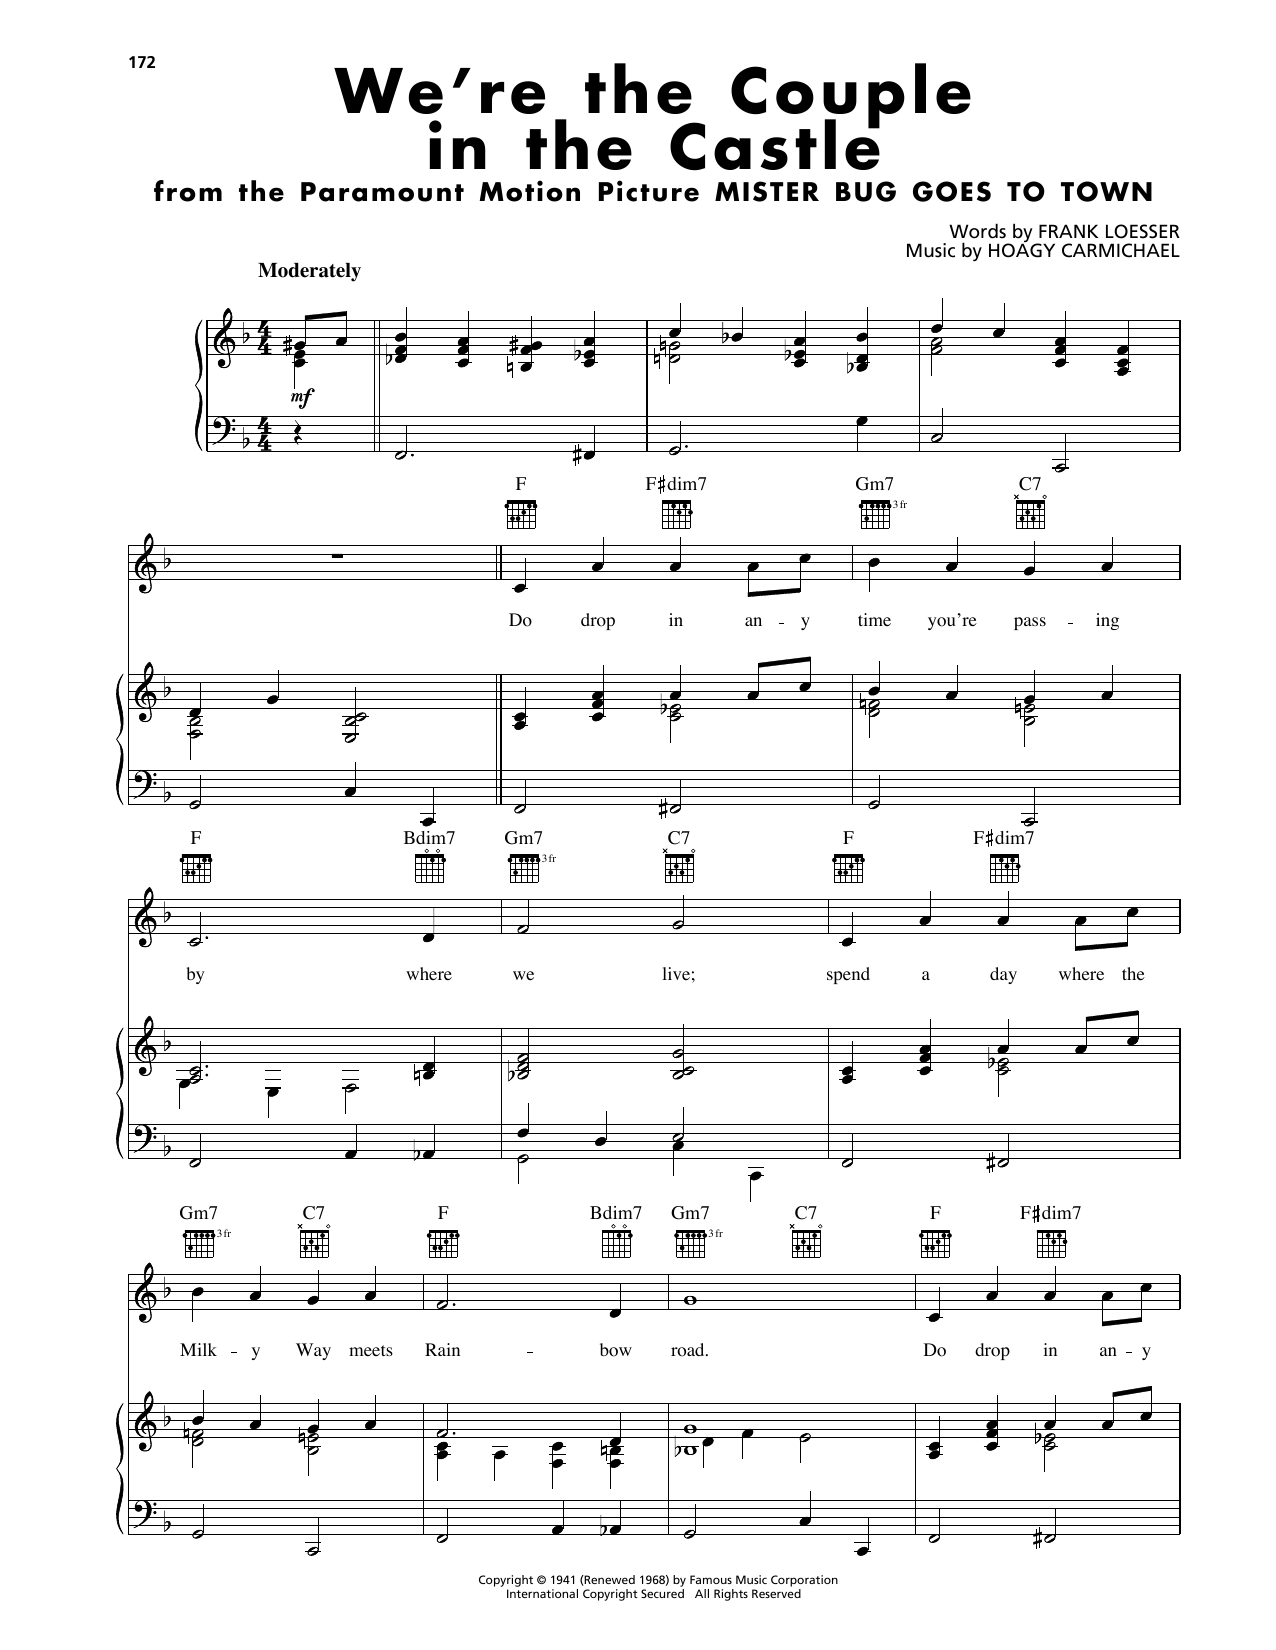 Download Hoagy Carmichael We're The Couple In The Castle Sheet Music